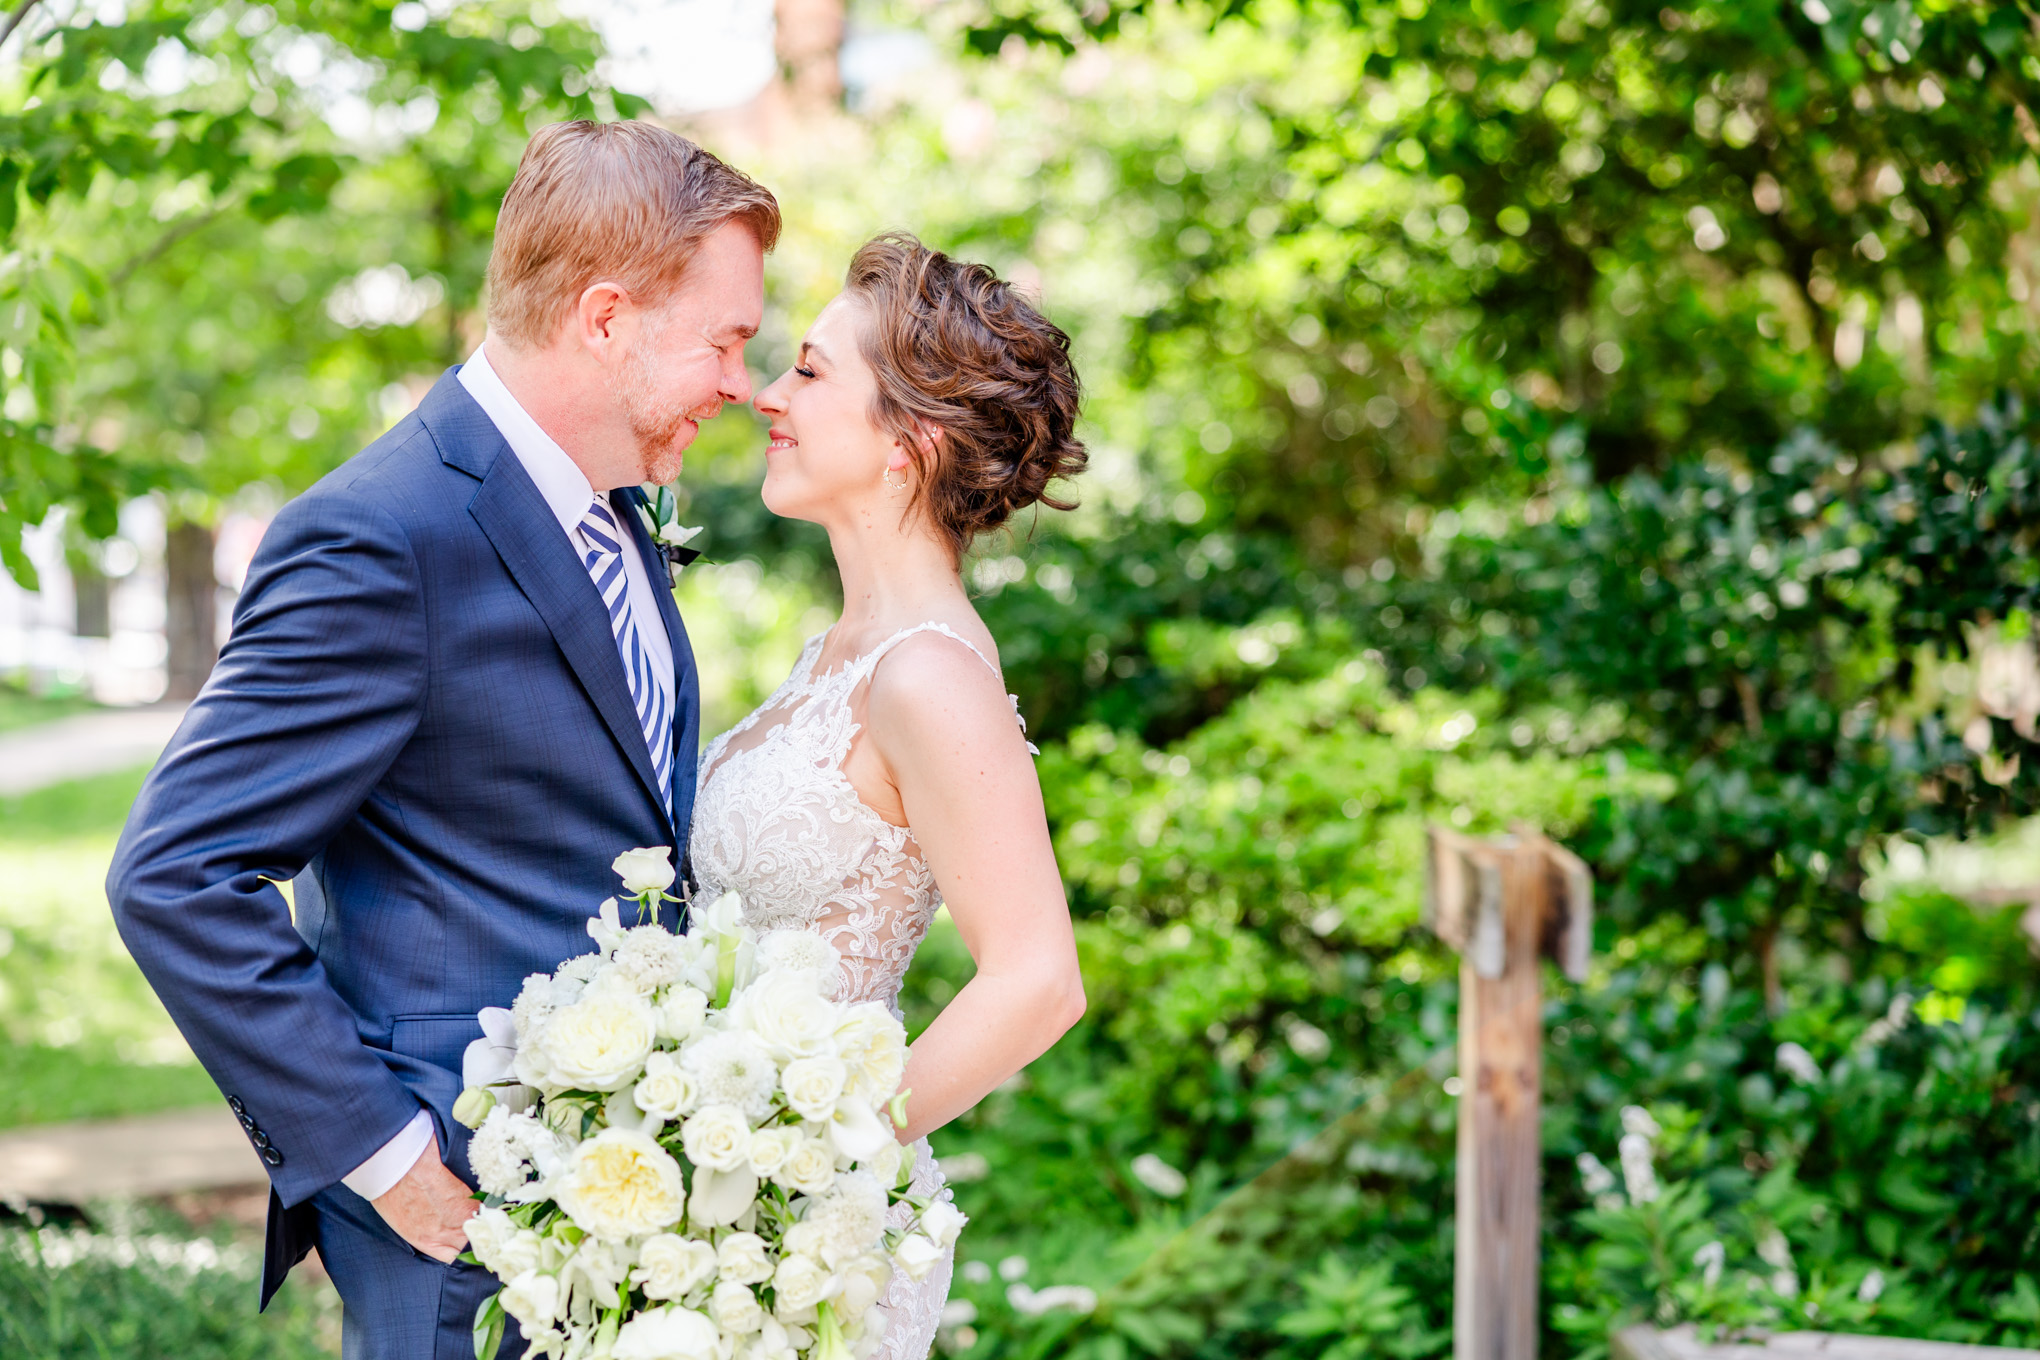 romantic Ritz Carlton Georgetown wedding, summer wedding aesthetic, green and white aesthetic, summer D.C. wedding, D.C. wedding venues, Ritz Carlton wedding, Washington D.C. wedding, romantic wedding aesthetic, Georgetown wedding, Rachel E.H. Photography, D.C. photographer, bride and groom smiling, couple touching noses